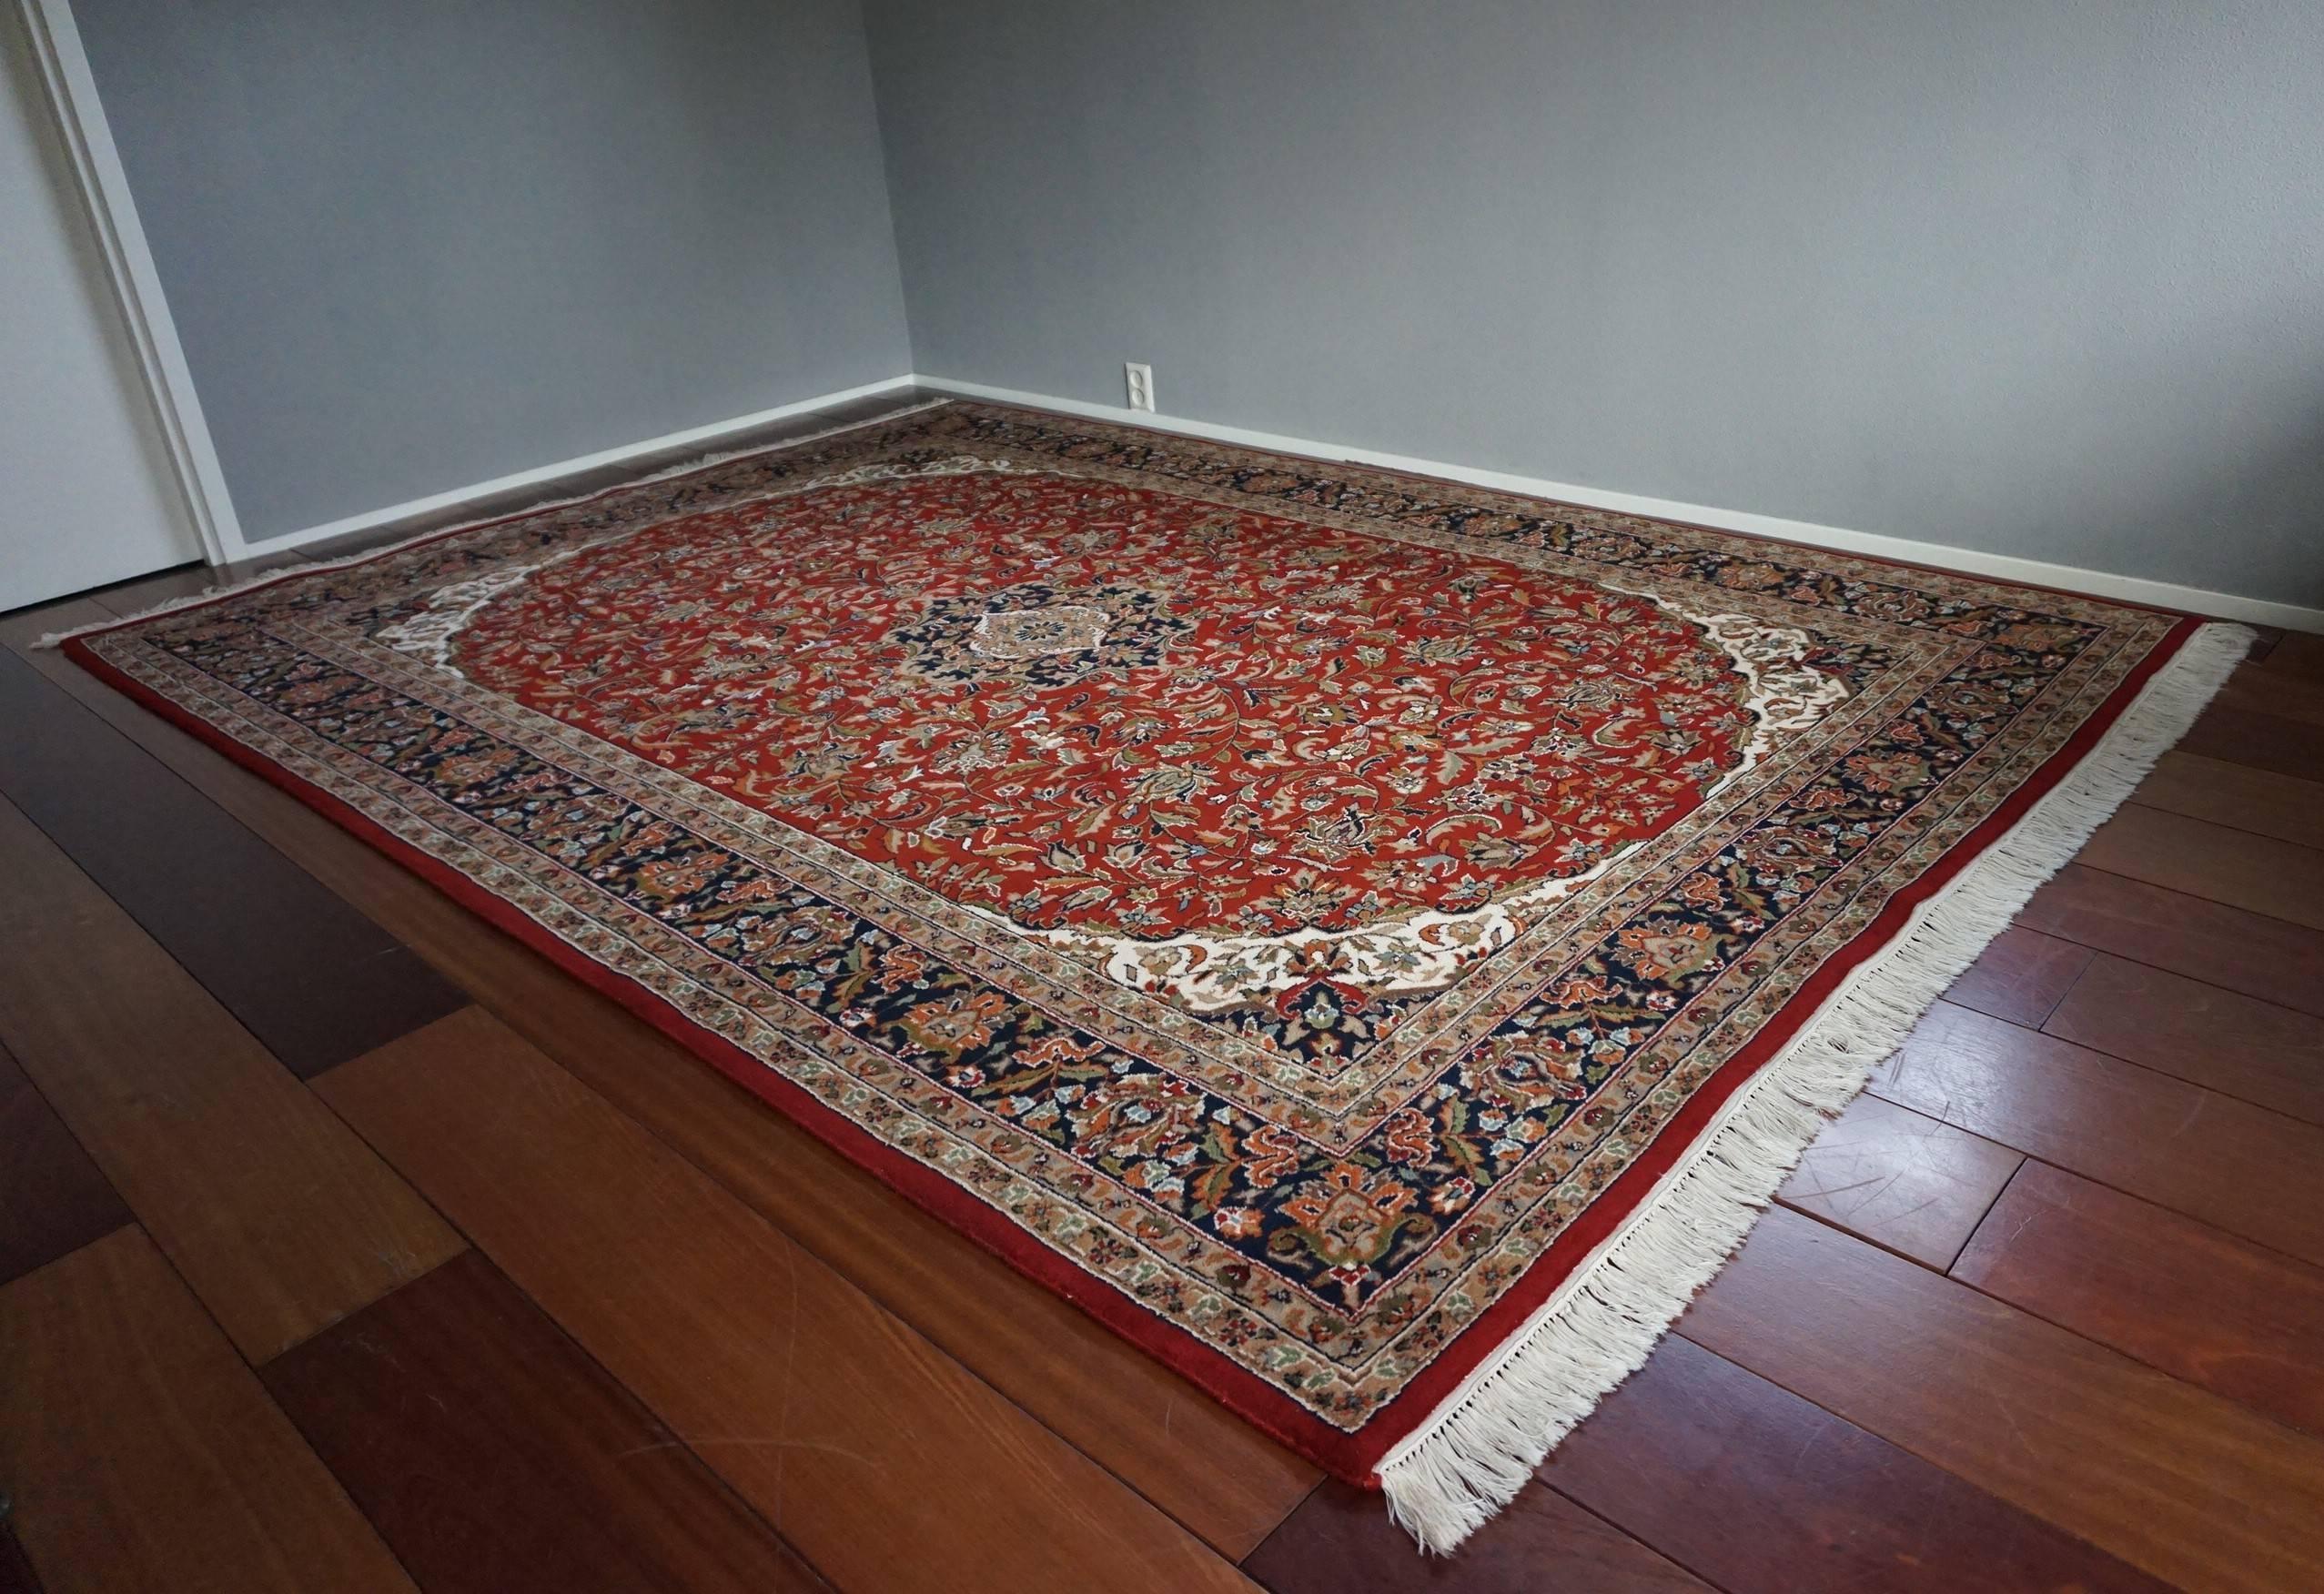 Stunning Bidjar Rug Fine Design and Vibrant Colors Hand-Knotted and Long 4